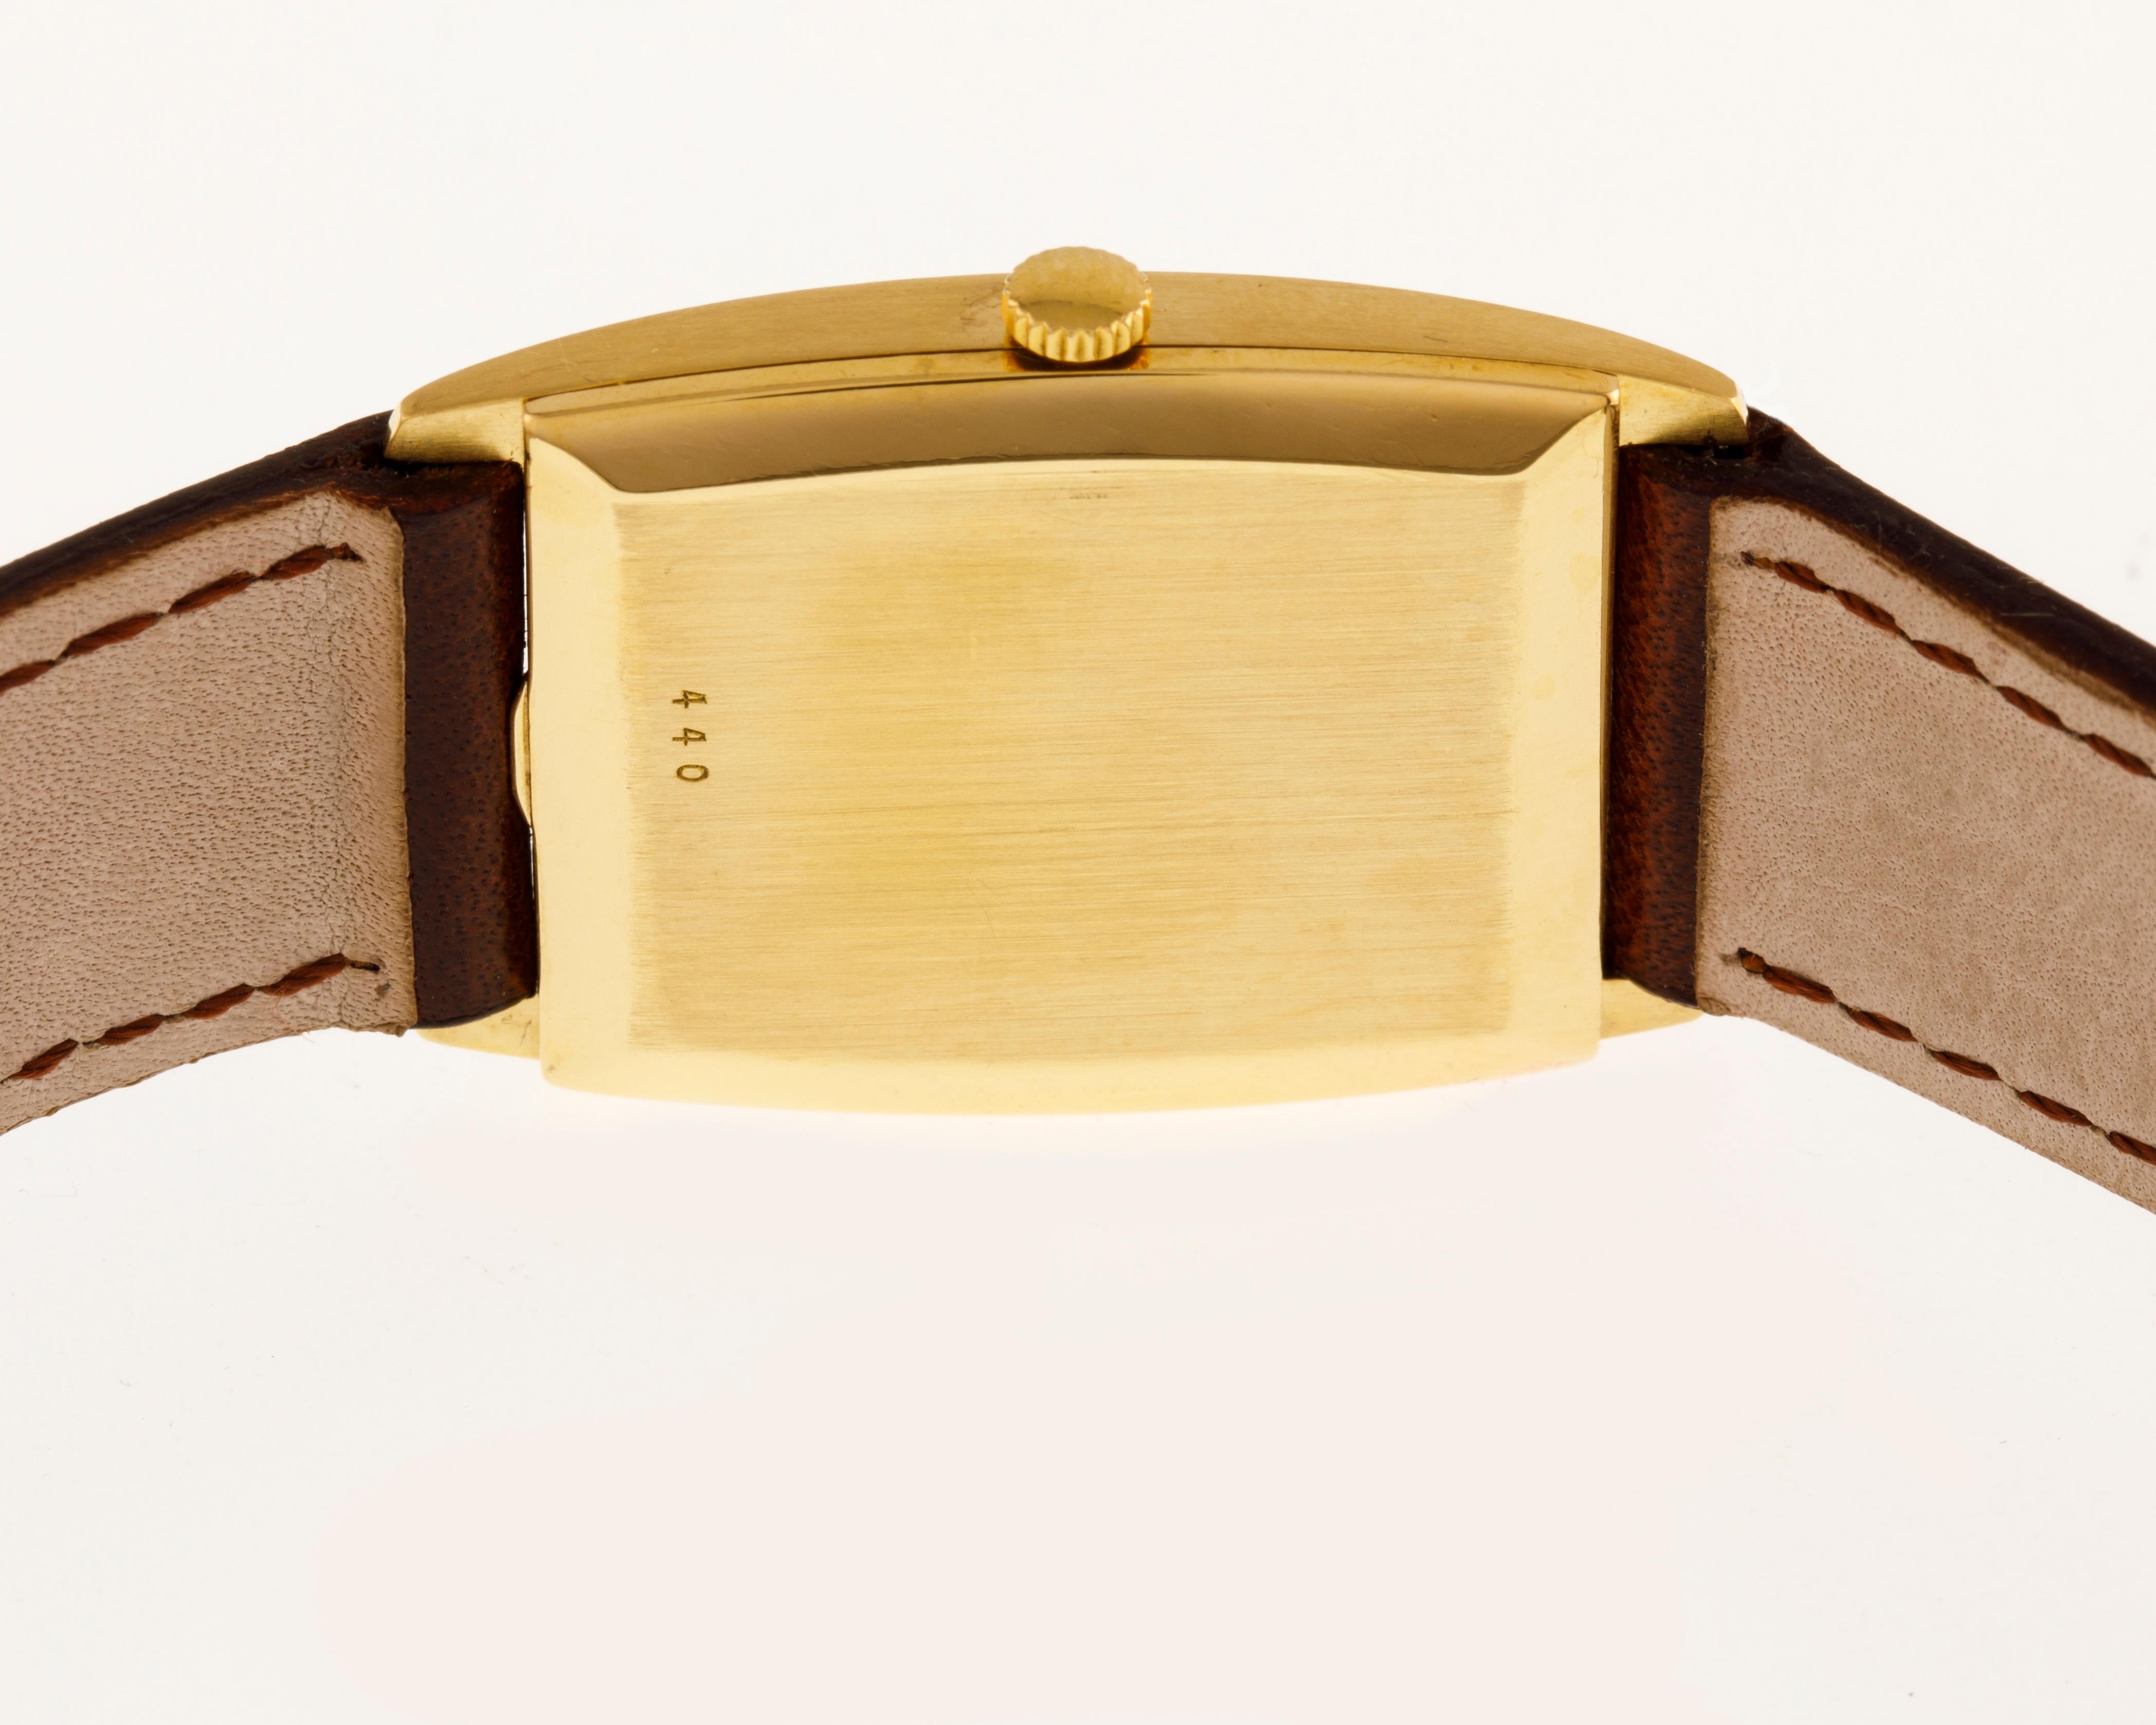 Vacheron & Constantin 18 Carat Yellow Gold Rectangular Wrist Watch from 1950's In Good Condition For Sale In Milan, IT